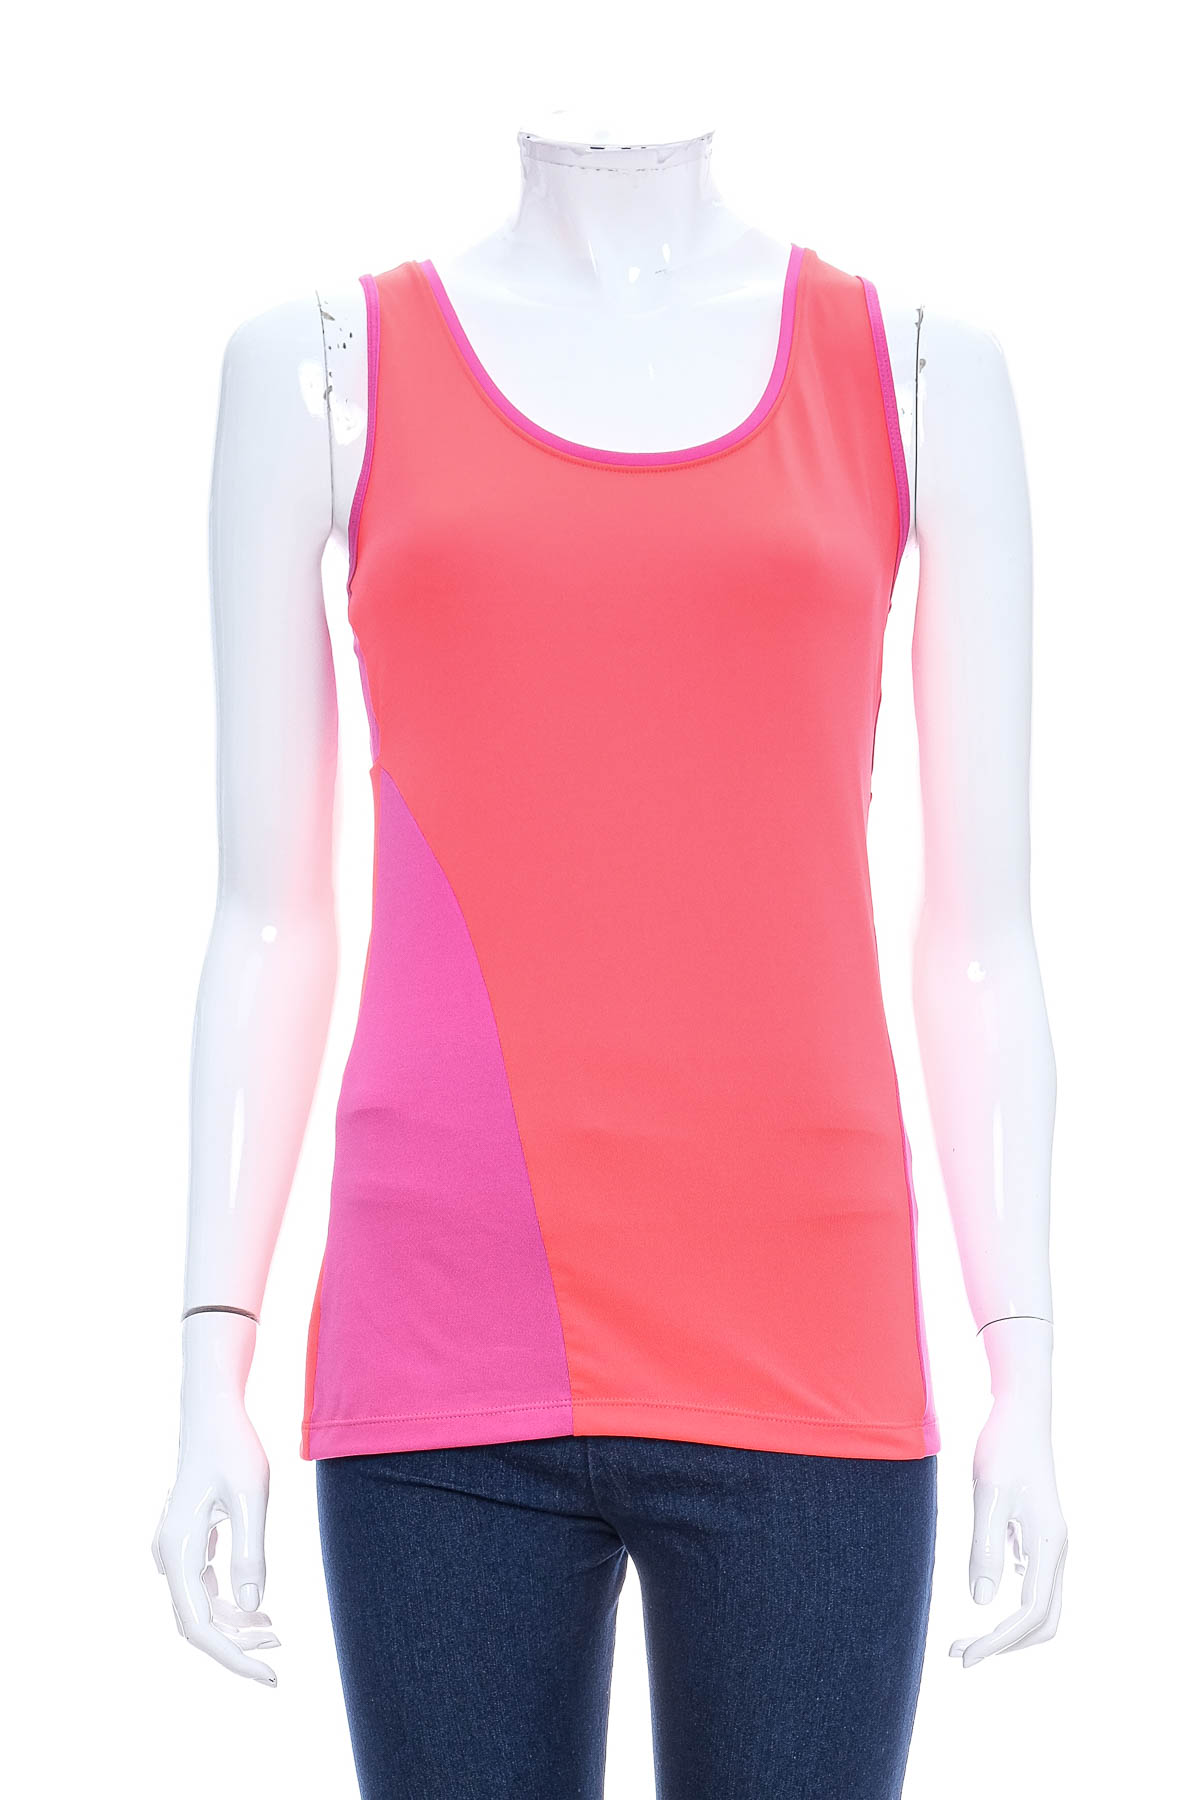 Women's top - Active by Tchibo - 0